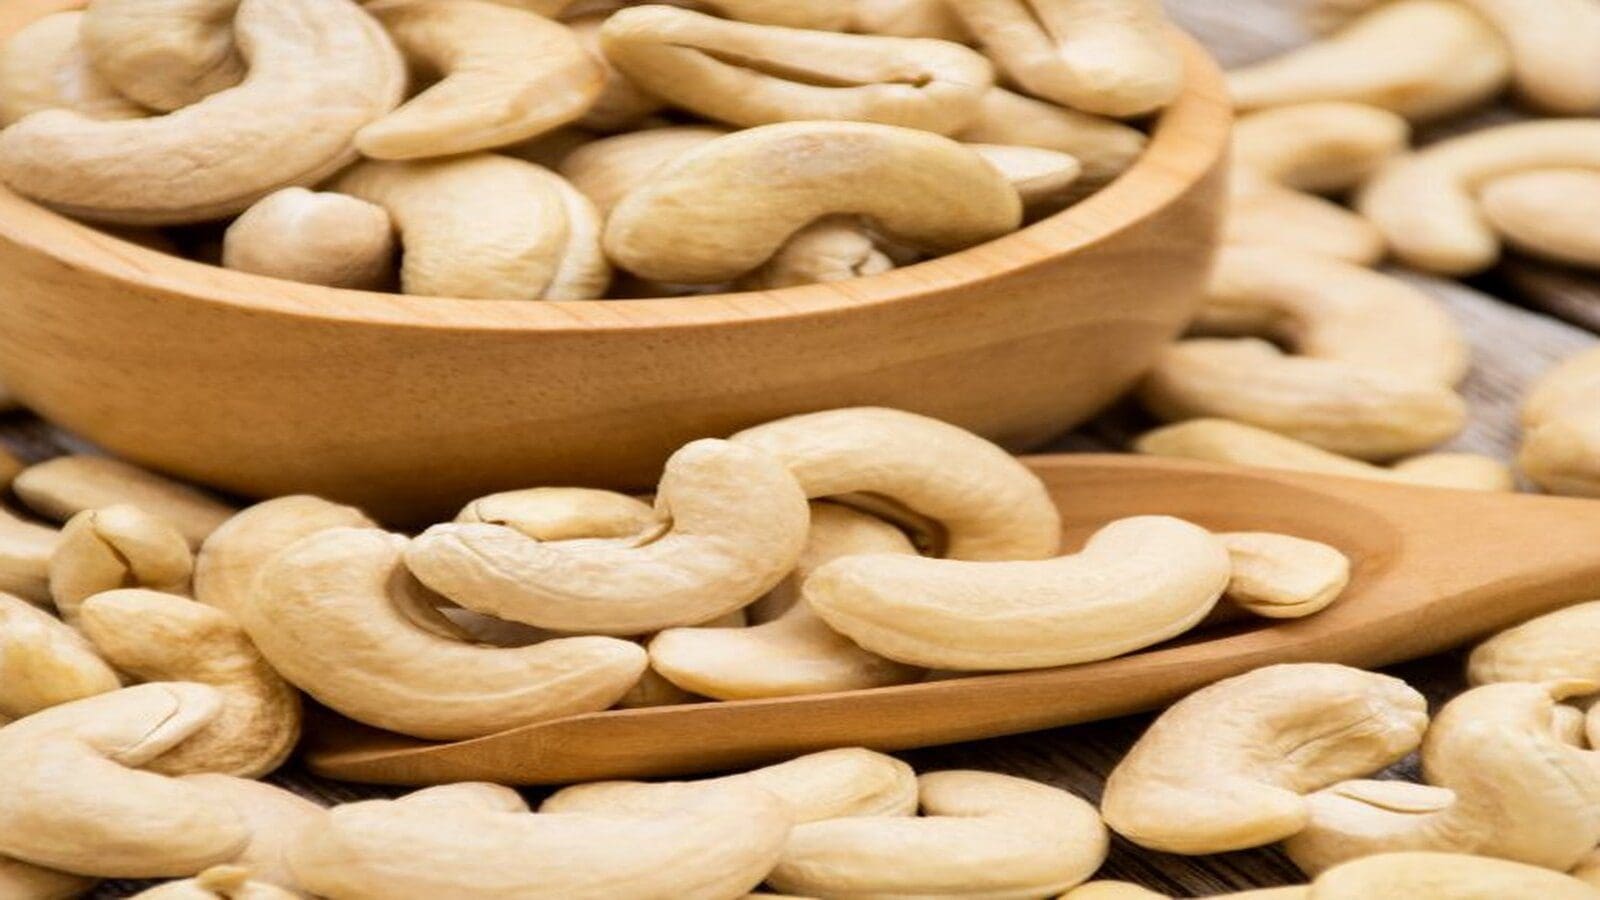 Tanzania to hold a historic International Cashew Conference (TICC) 2023